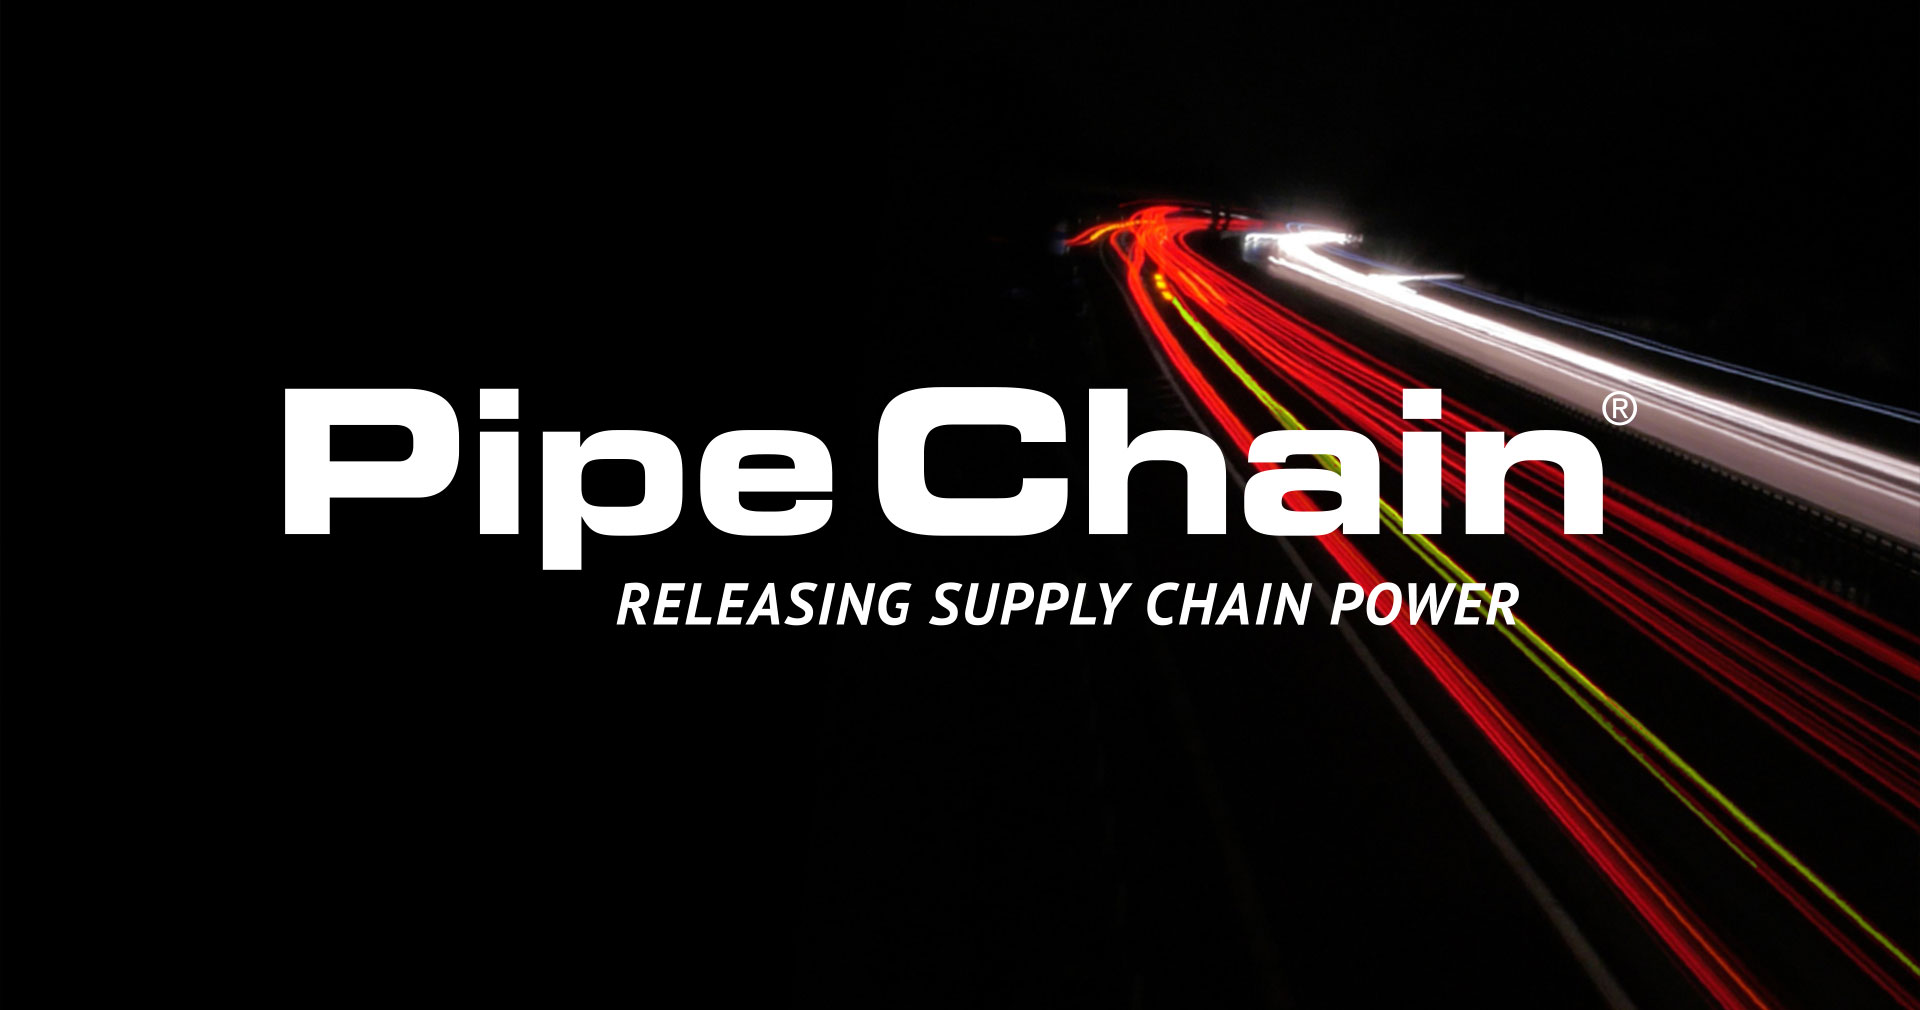 PipeChain Networks AB